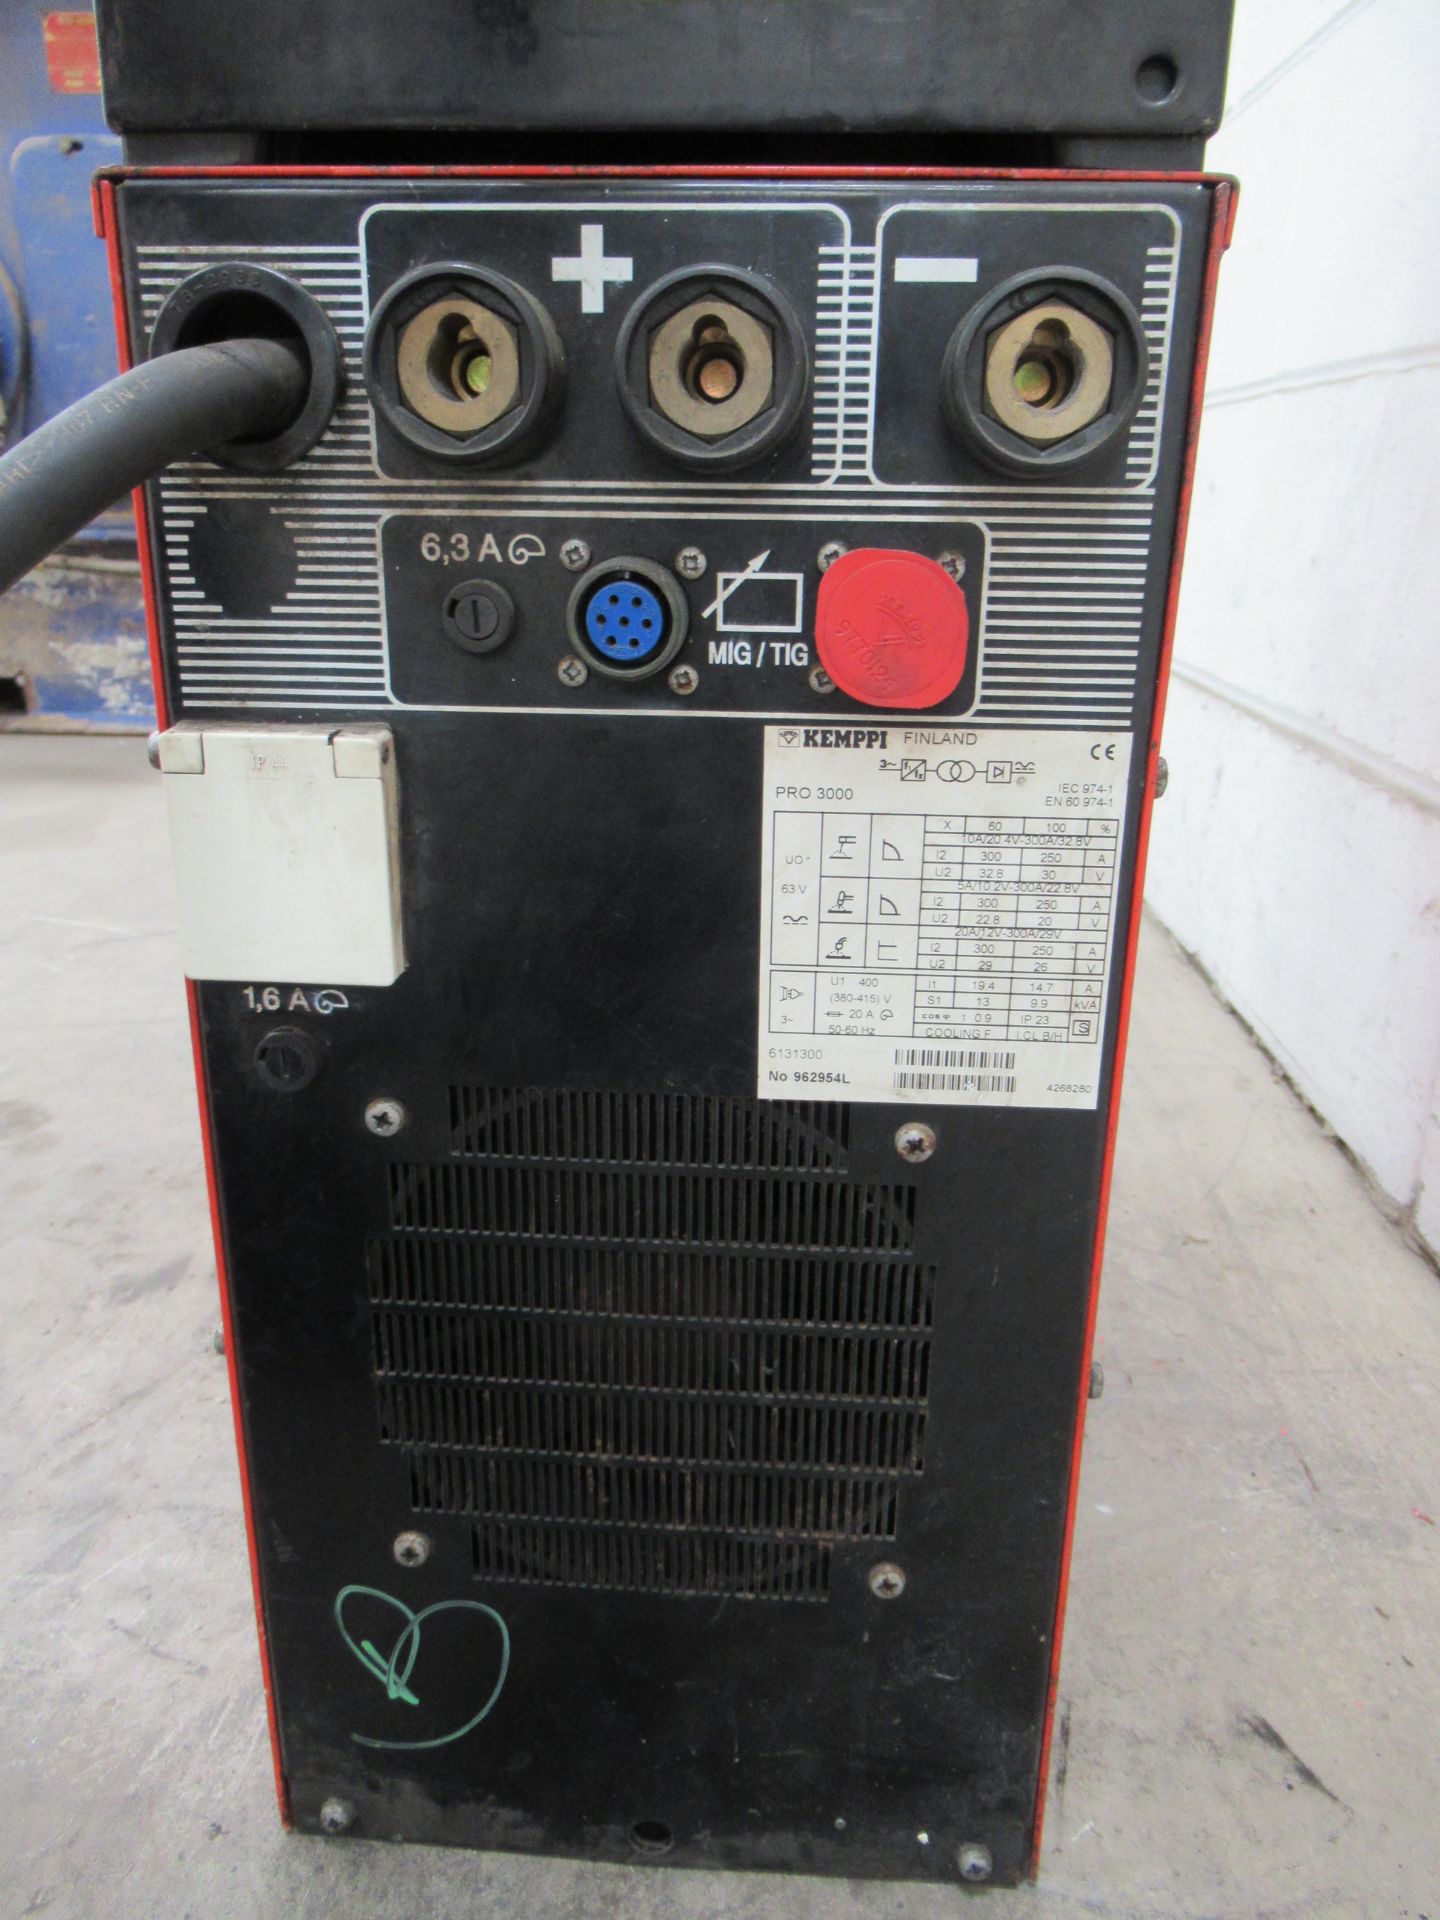 Kemppi MXE Process synergic Promig 540R Welder with Kemppi Pro 3000 power source c/w leads and torch - Image 8 of 10